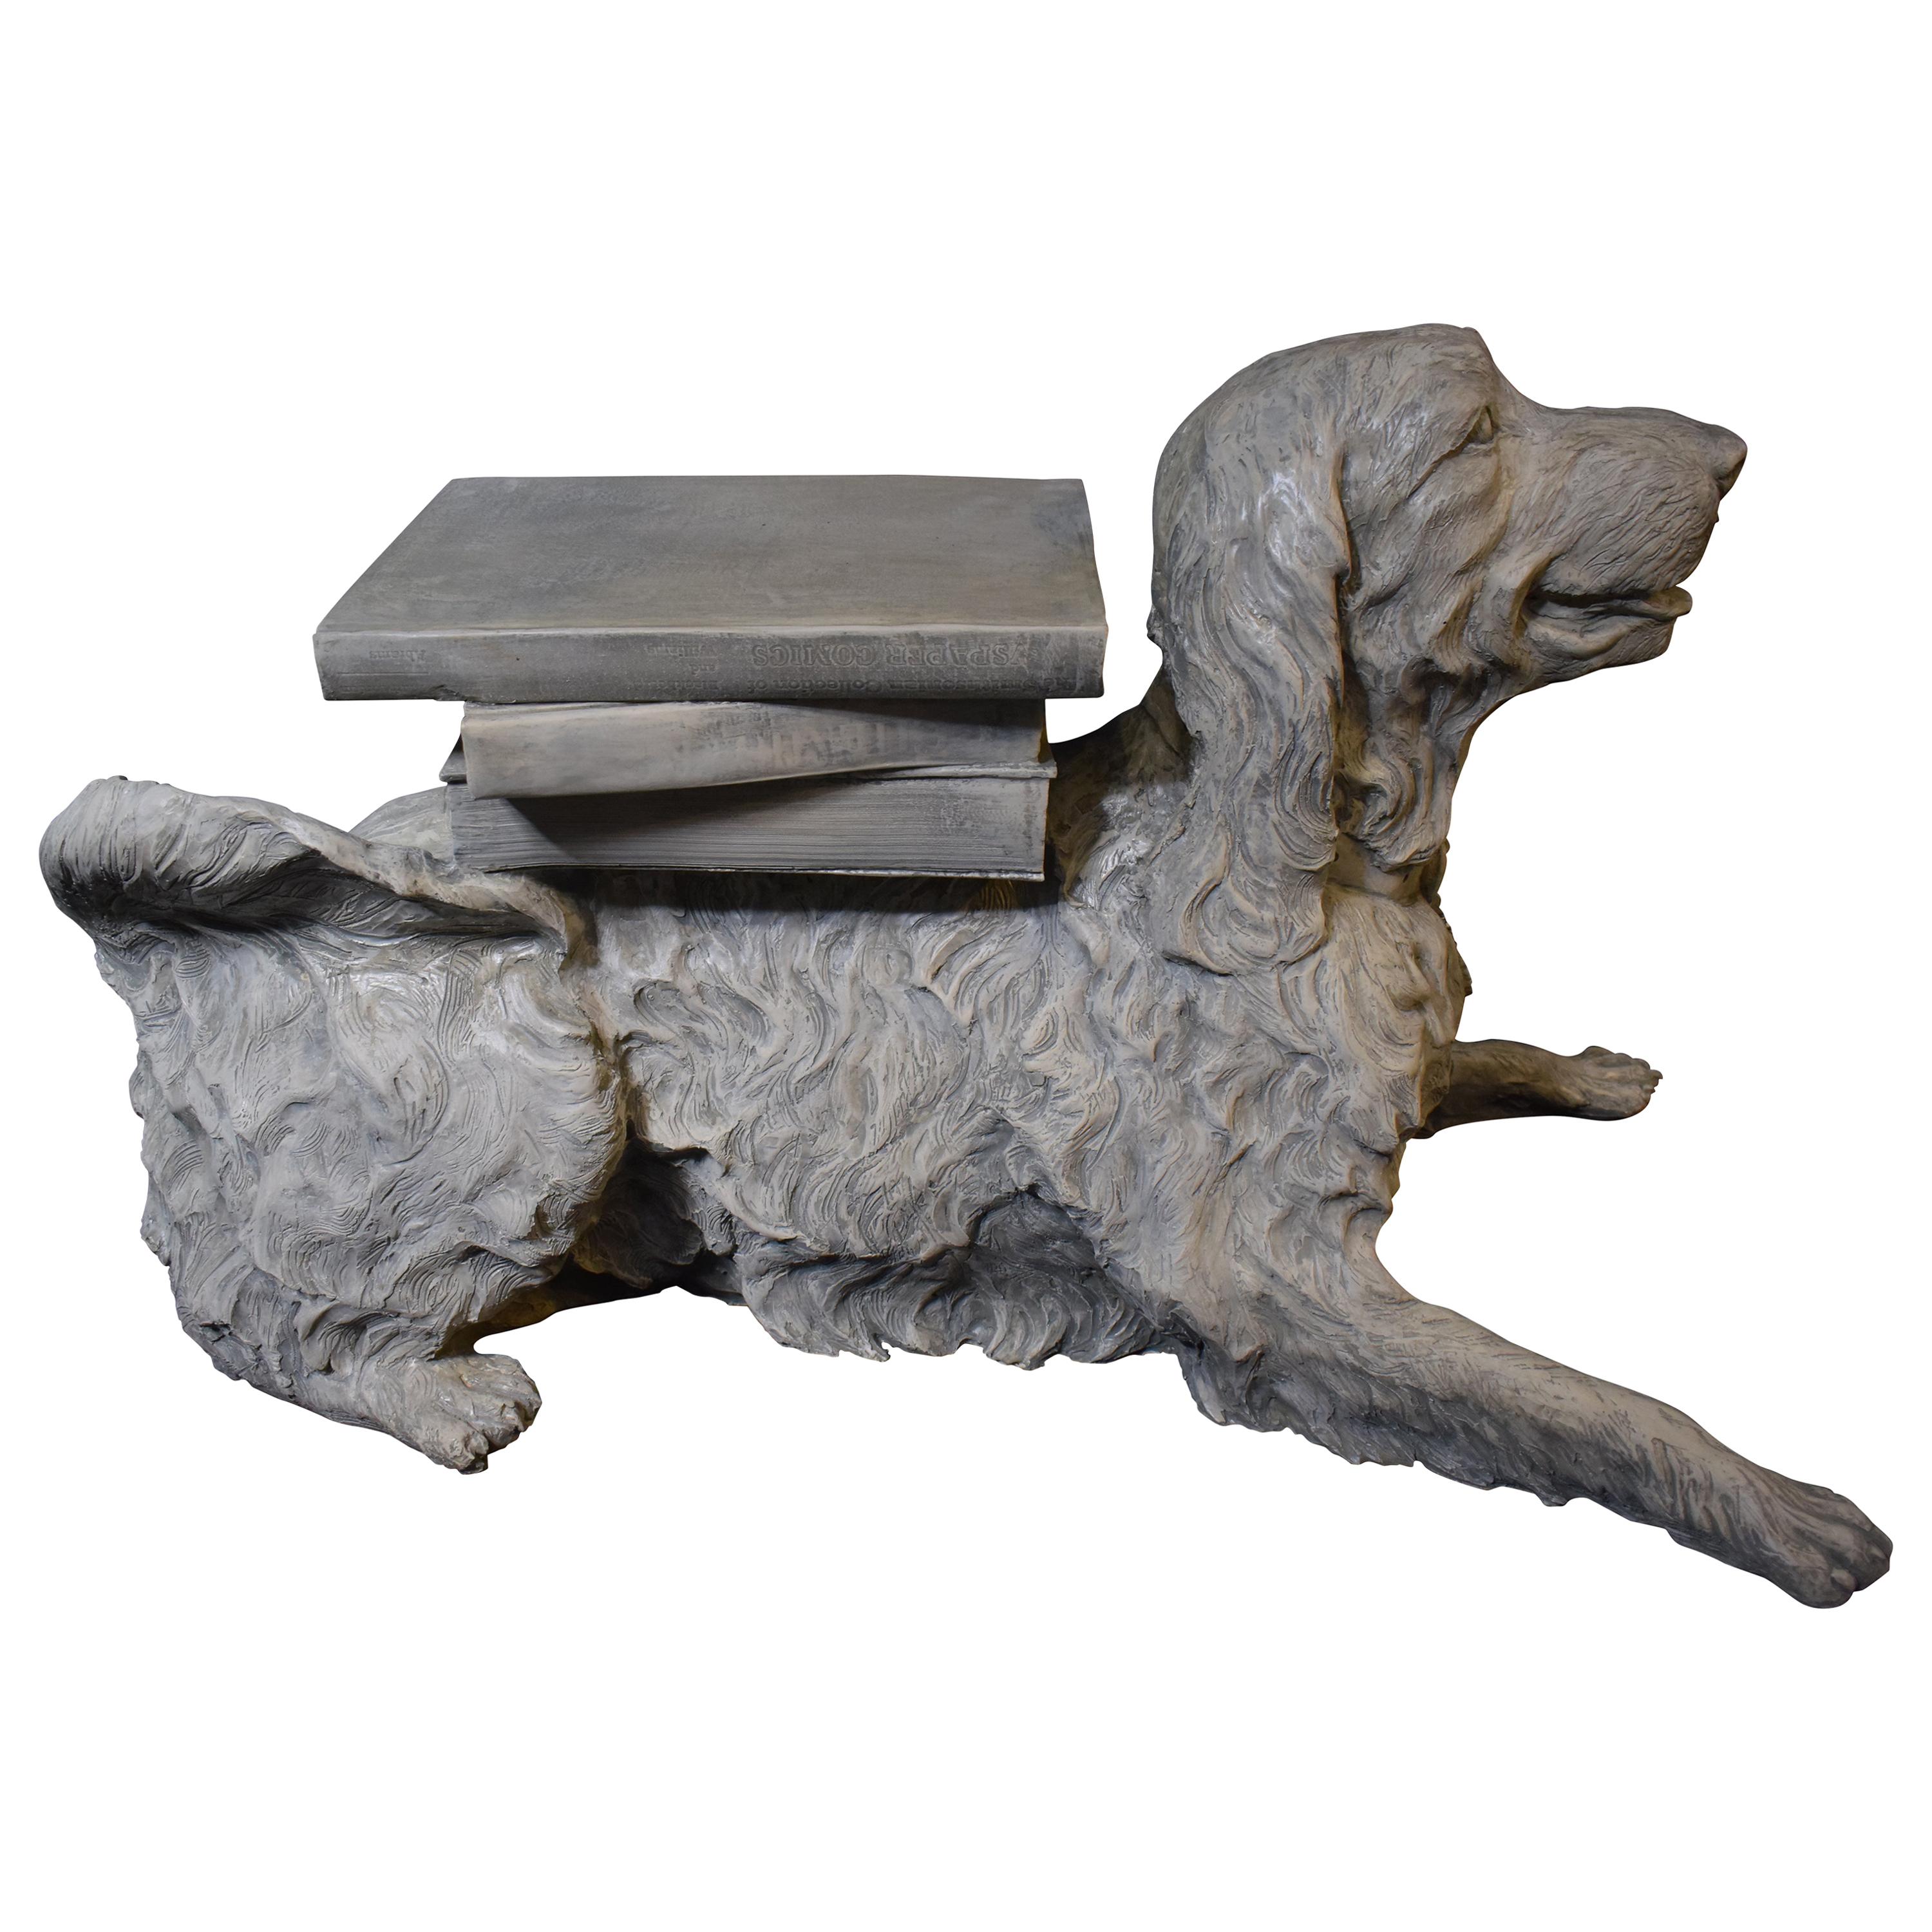 Highly Decorative Full Size Sculpture of a Dog Laying Down For Sale